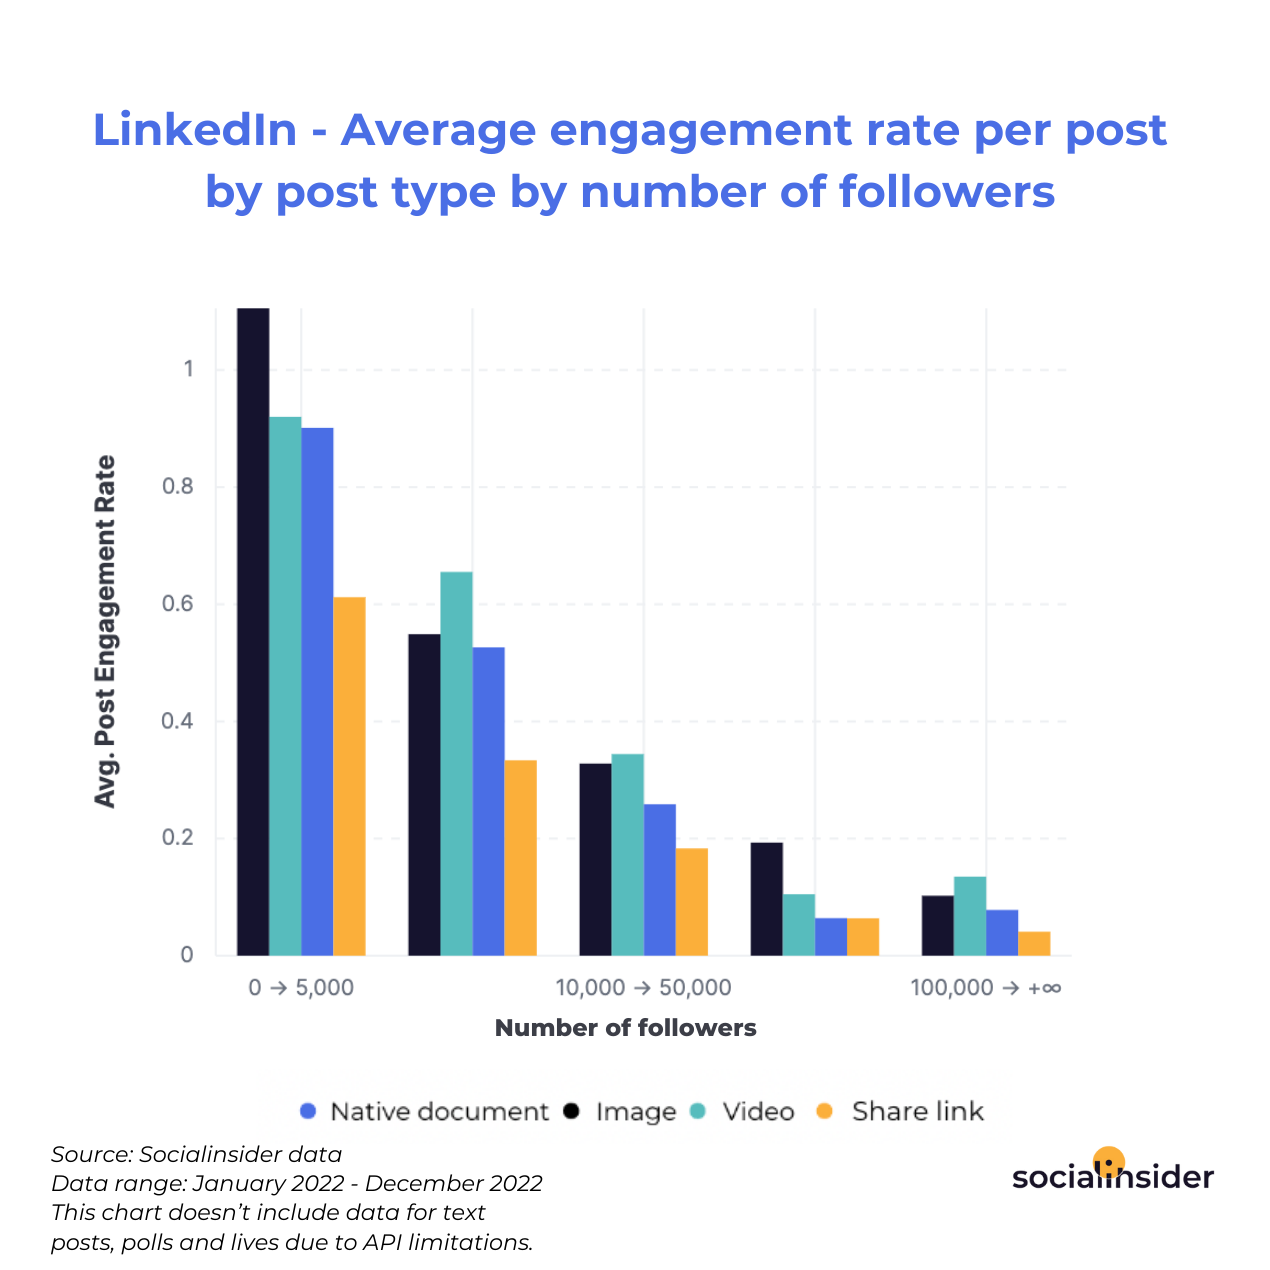 LinkedIn - Average engagement rate per post by post type